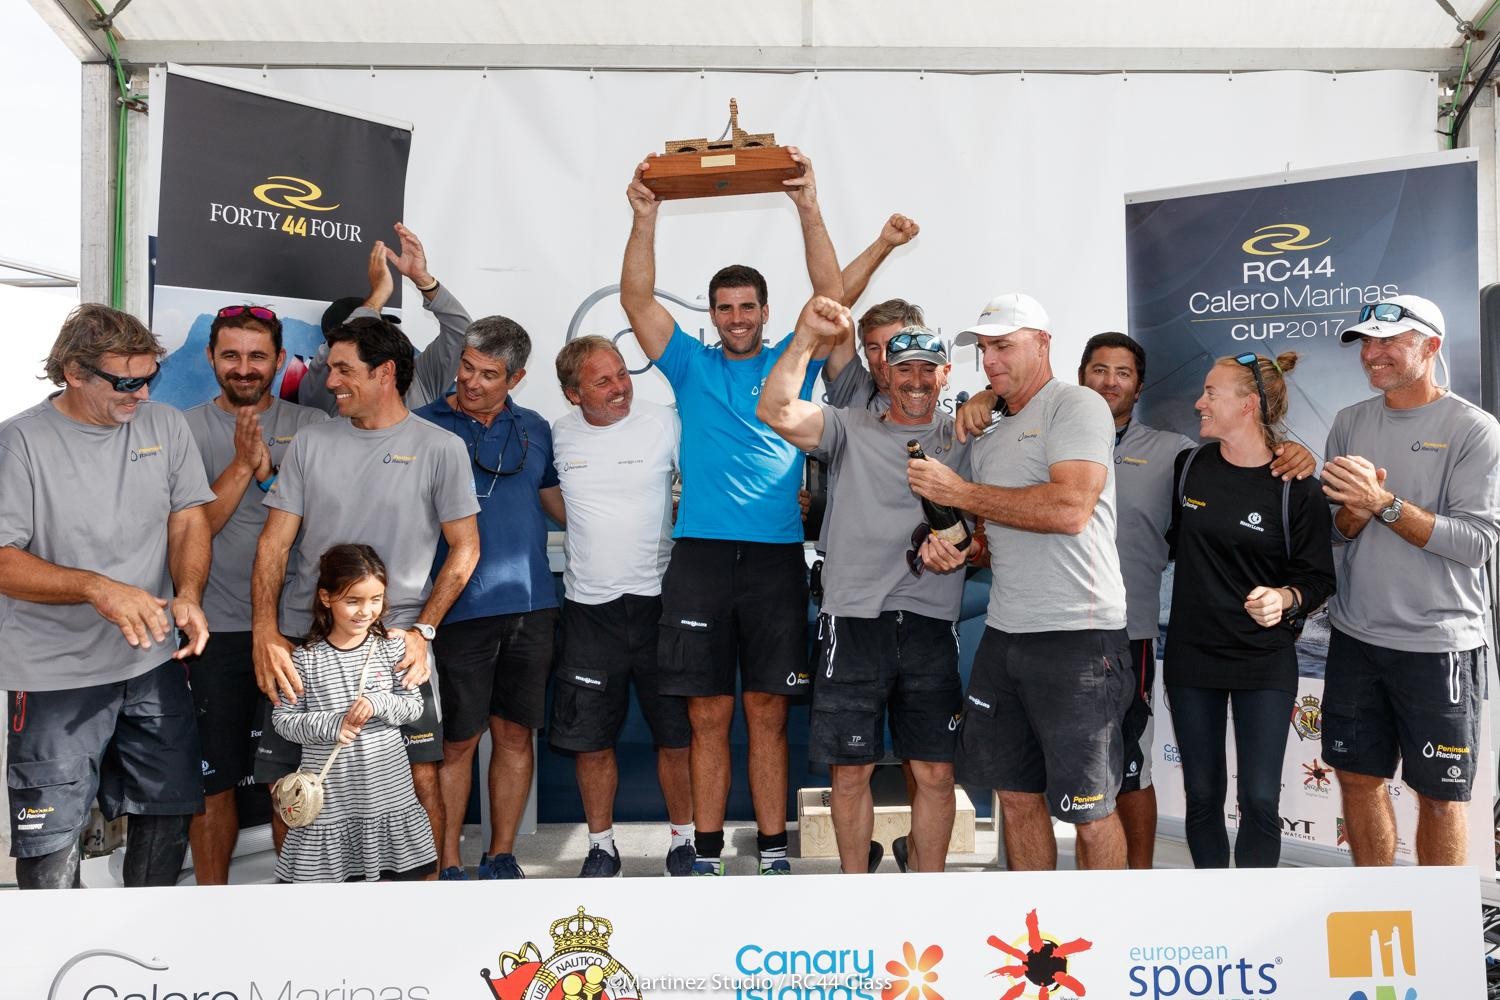 RC44 title for Team Ceeref